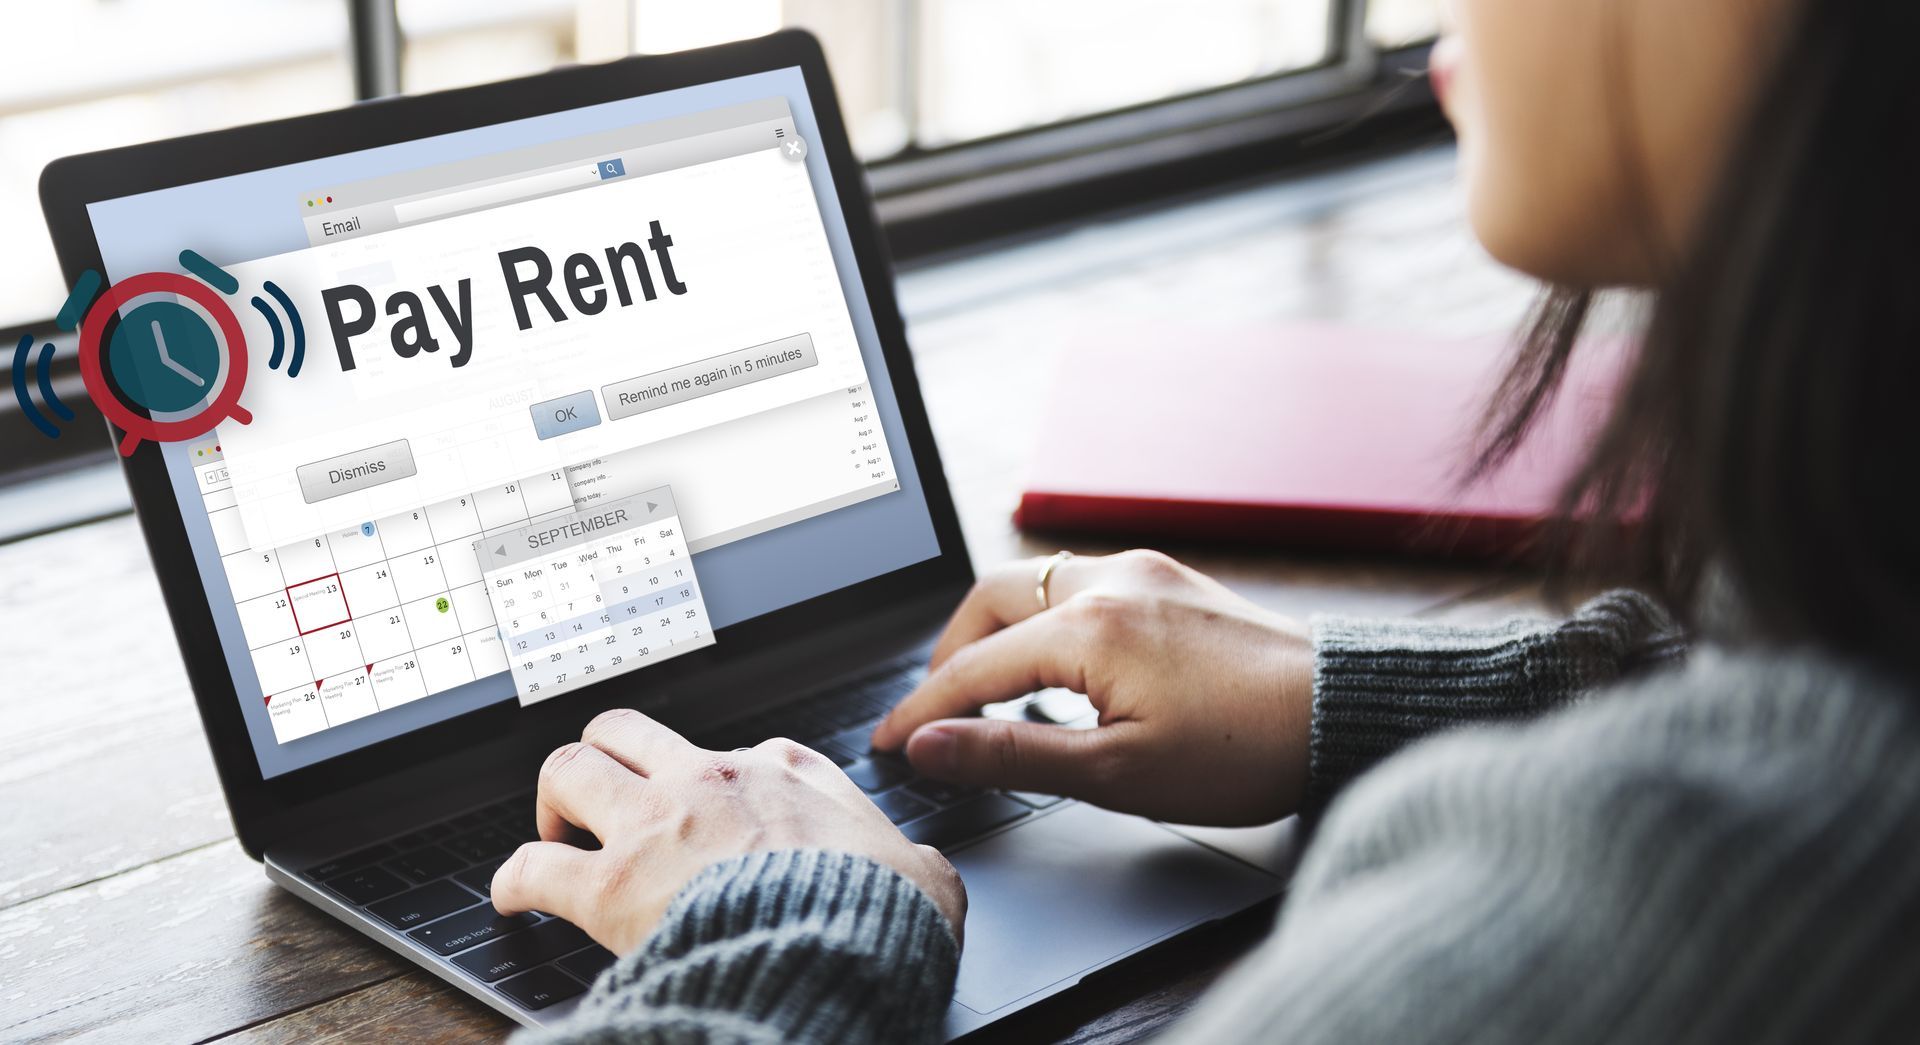 person paying rent using a laptop